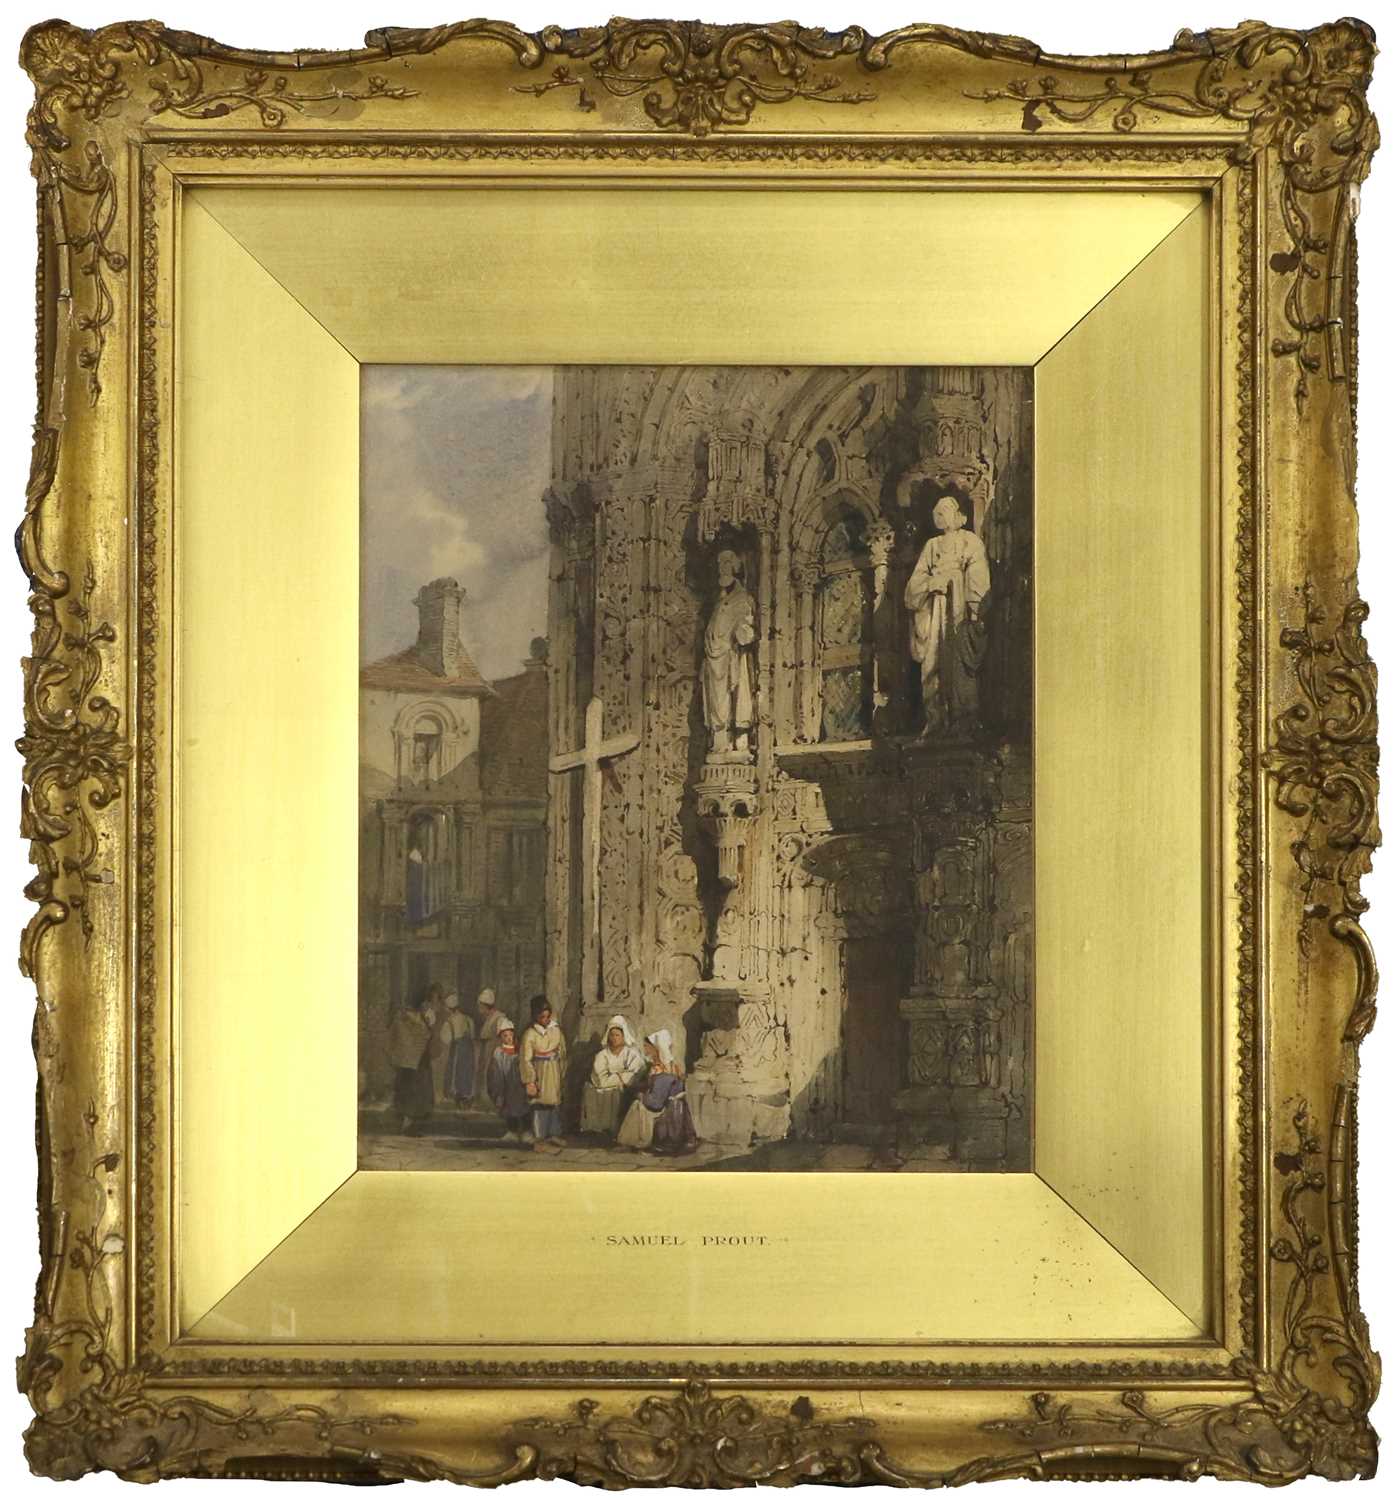 Samuel Prout OWS (1783-1852) "St Symphorien, Tours" Signed, extensively inscribed and dated 1839, - Image 2 of 15